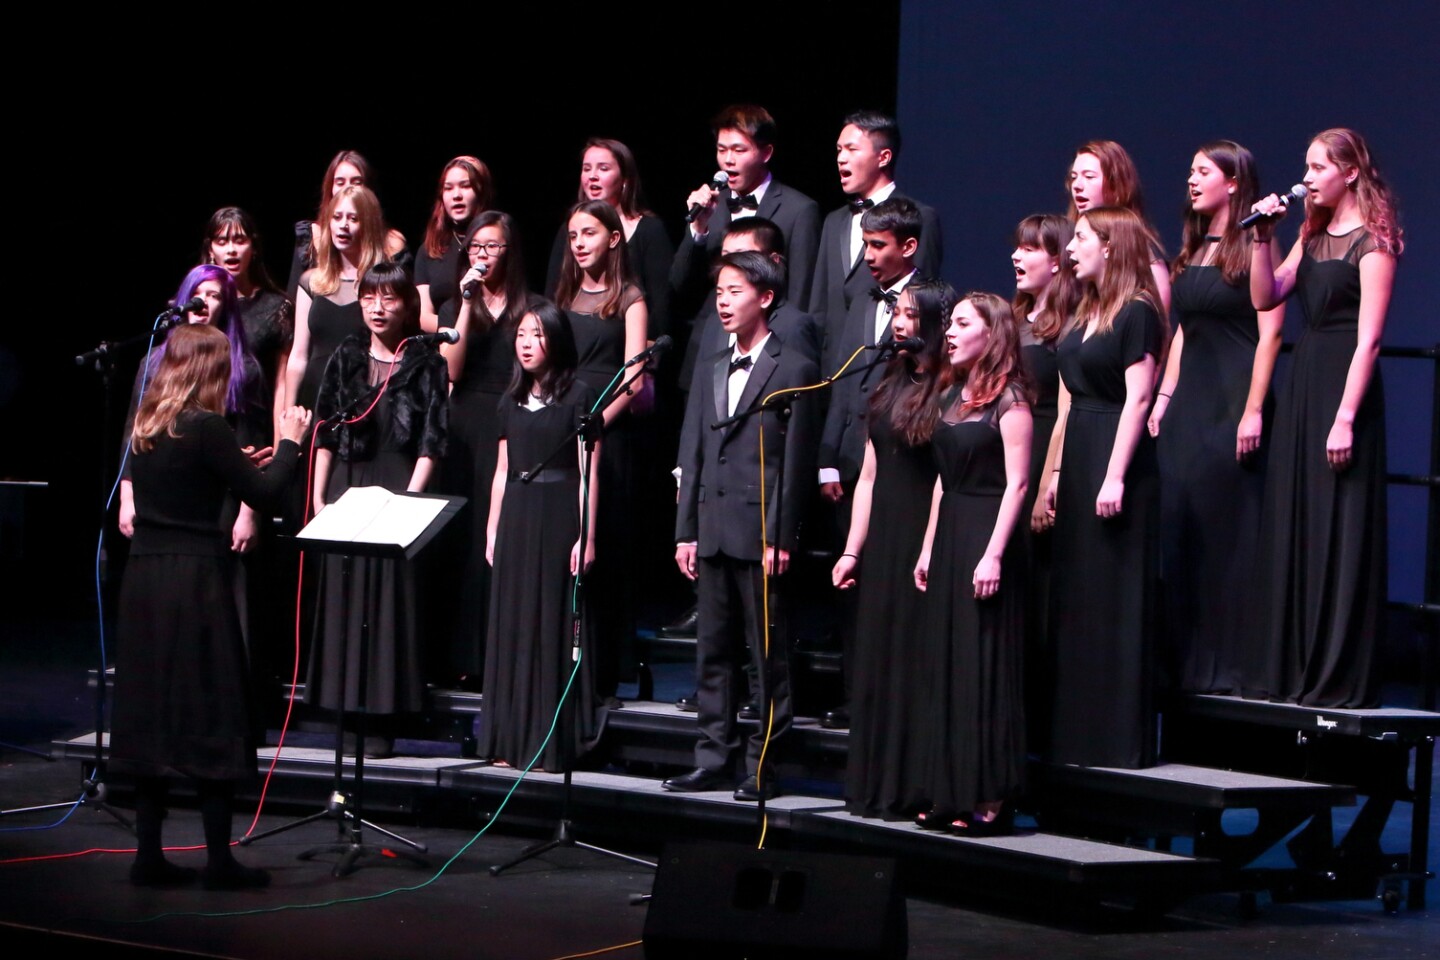 The Torrey Pines High School choir directed by Amy Gelb